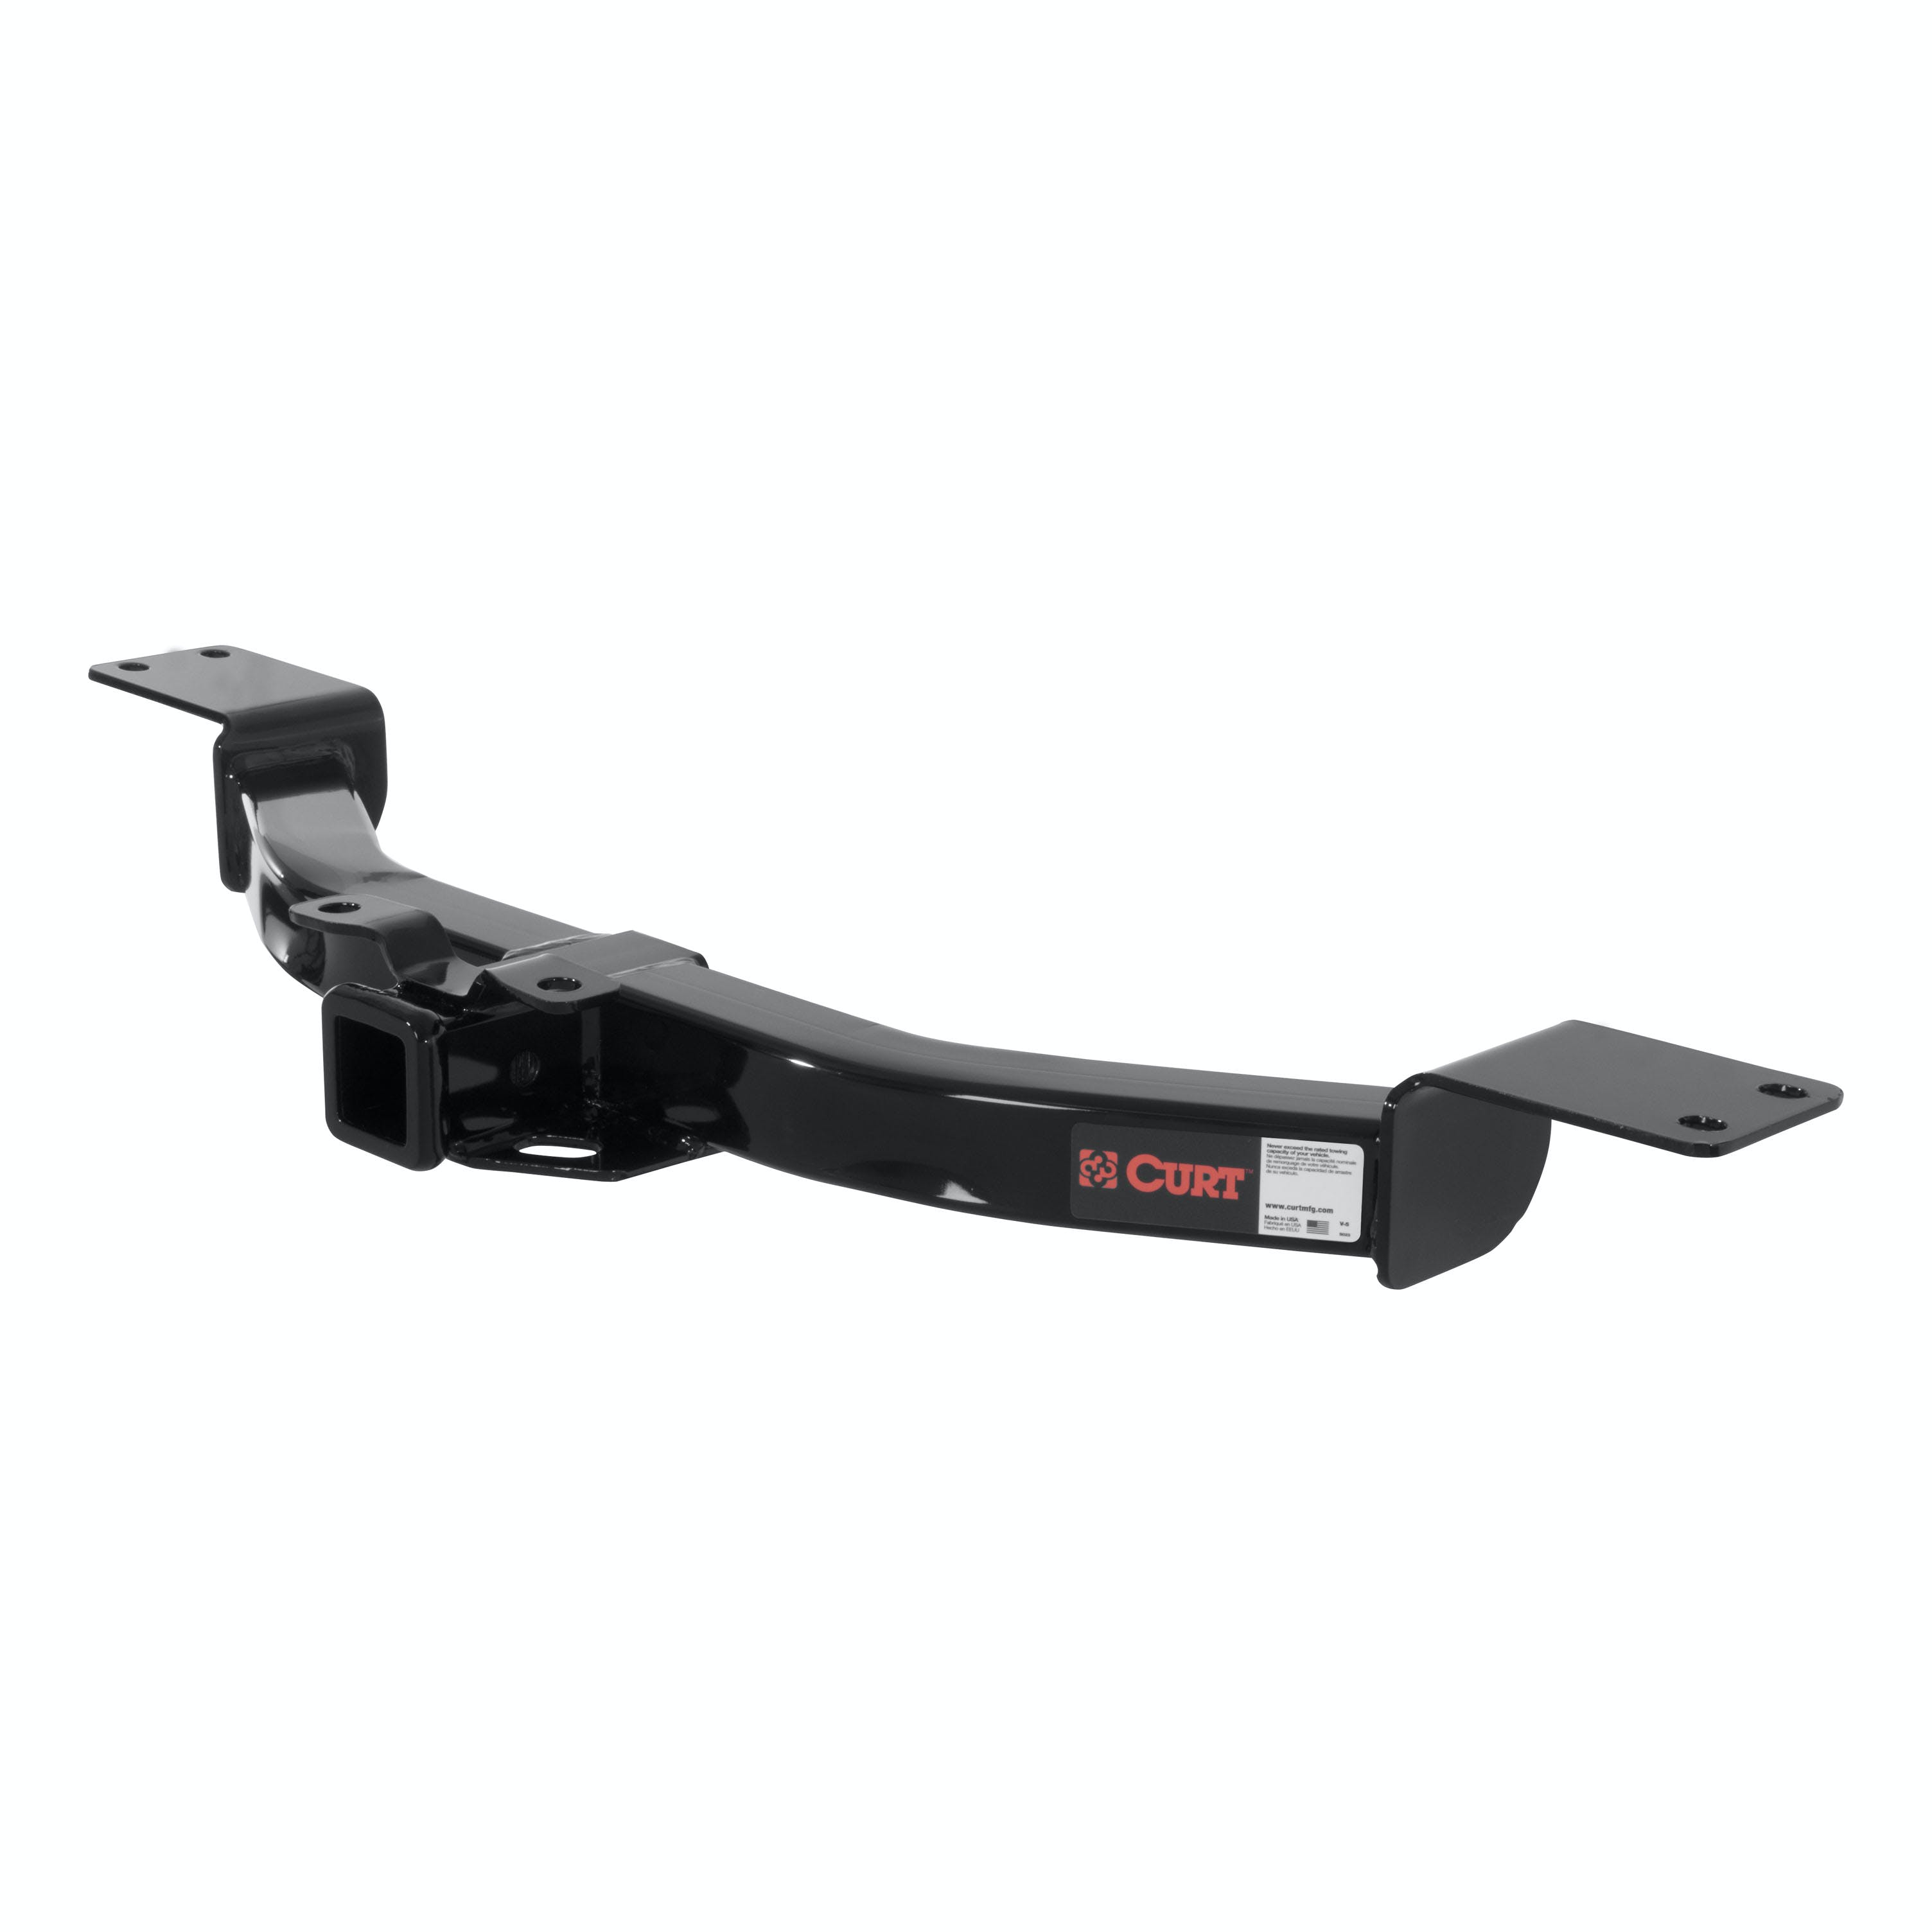 CURT 13424 Class 3 Hitch, 2, Select Buick Enclave, Chevy Traverse, GMC Acadia, Outlook